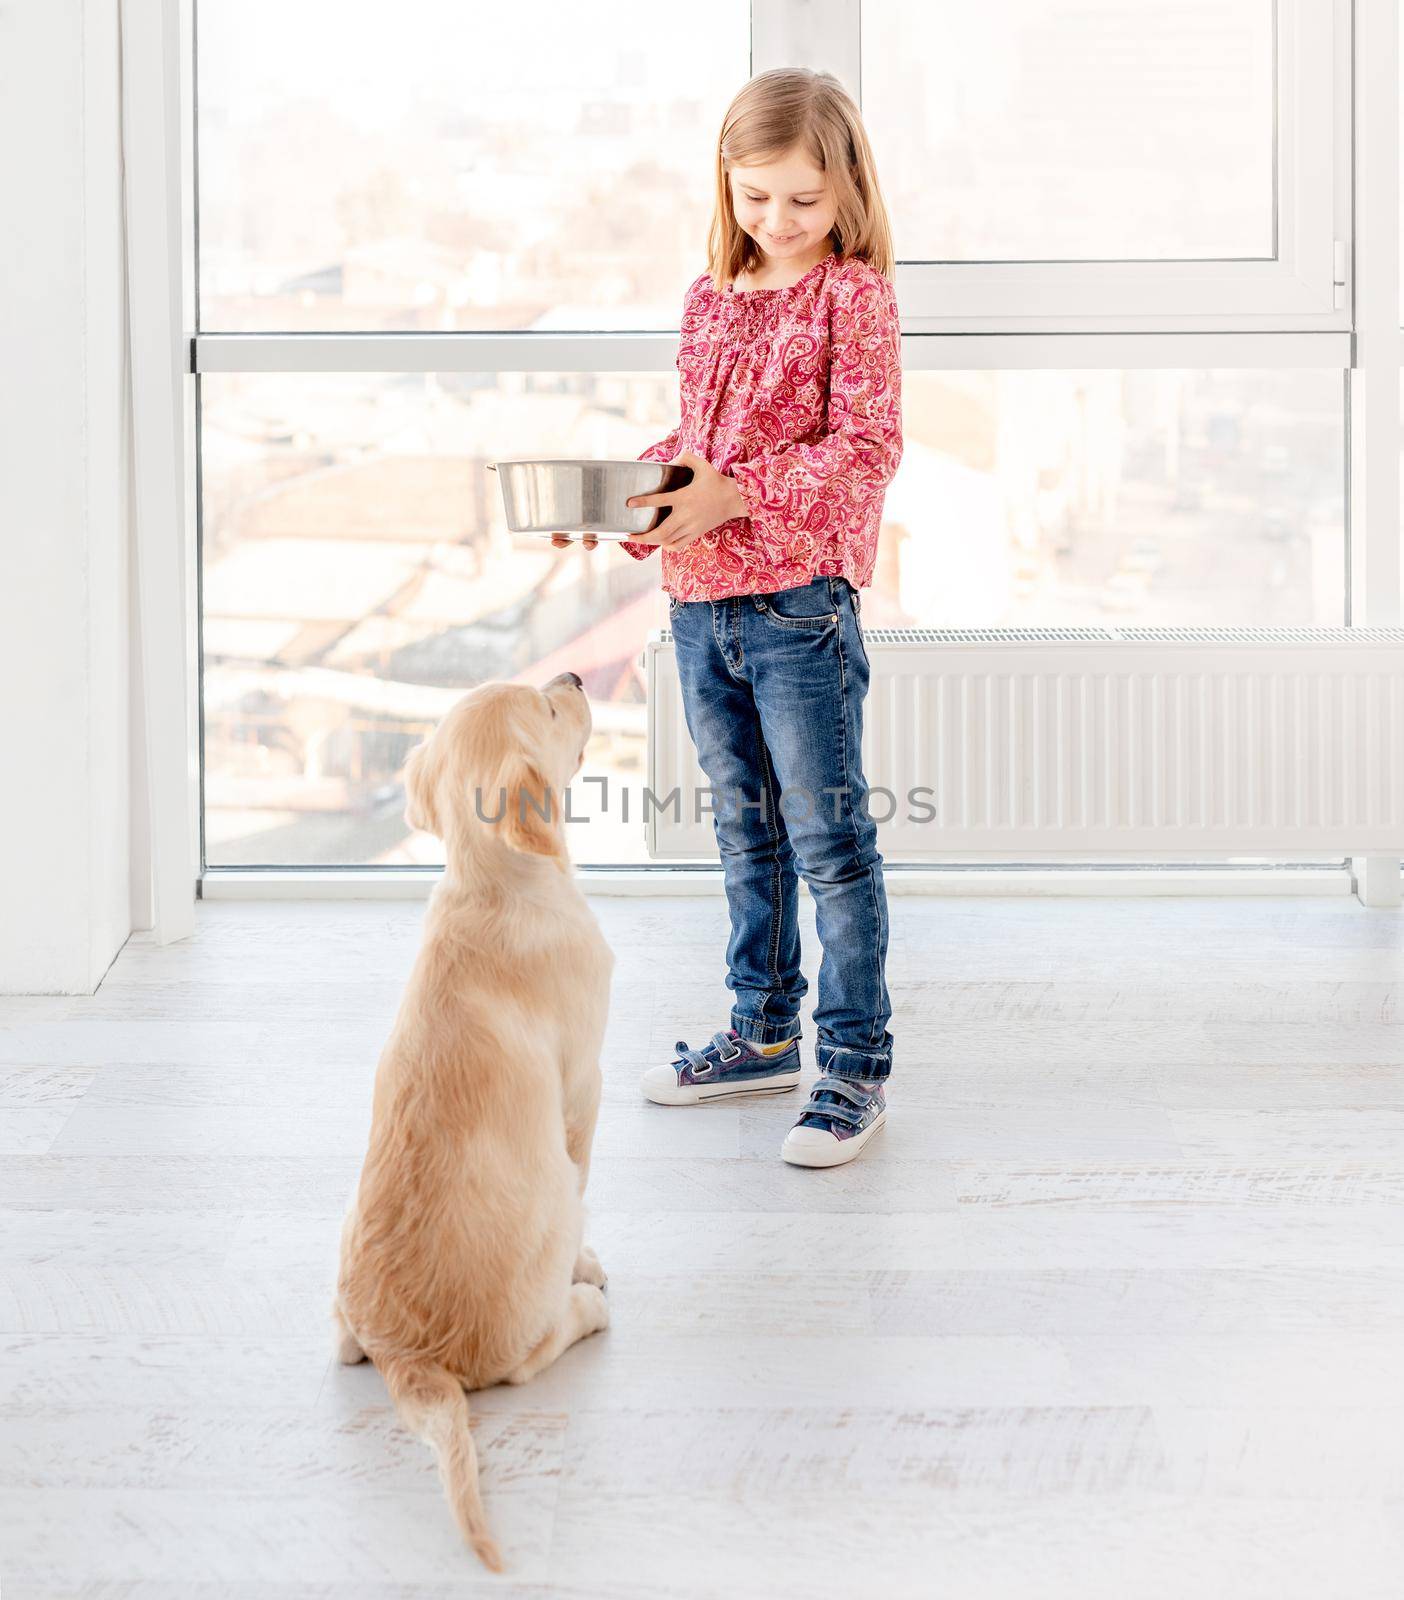 Lovely little girl giving food to her beautiful dog indoors